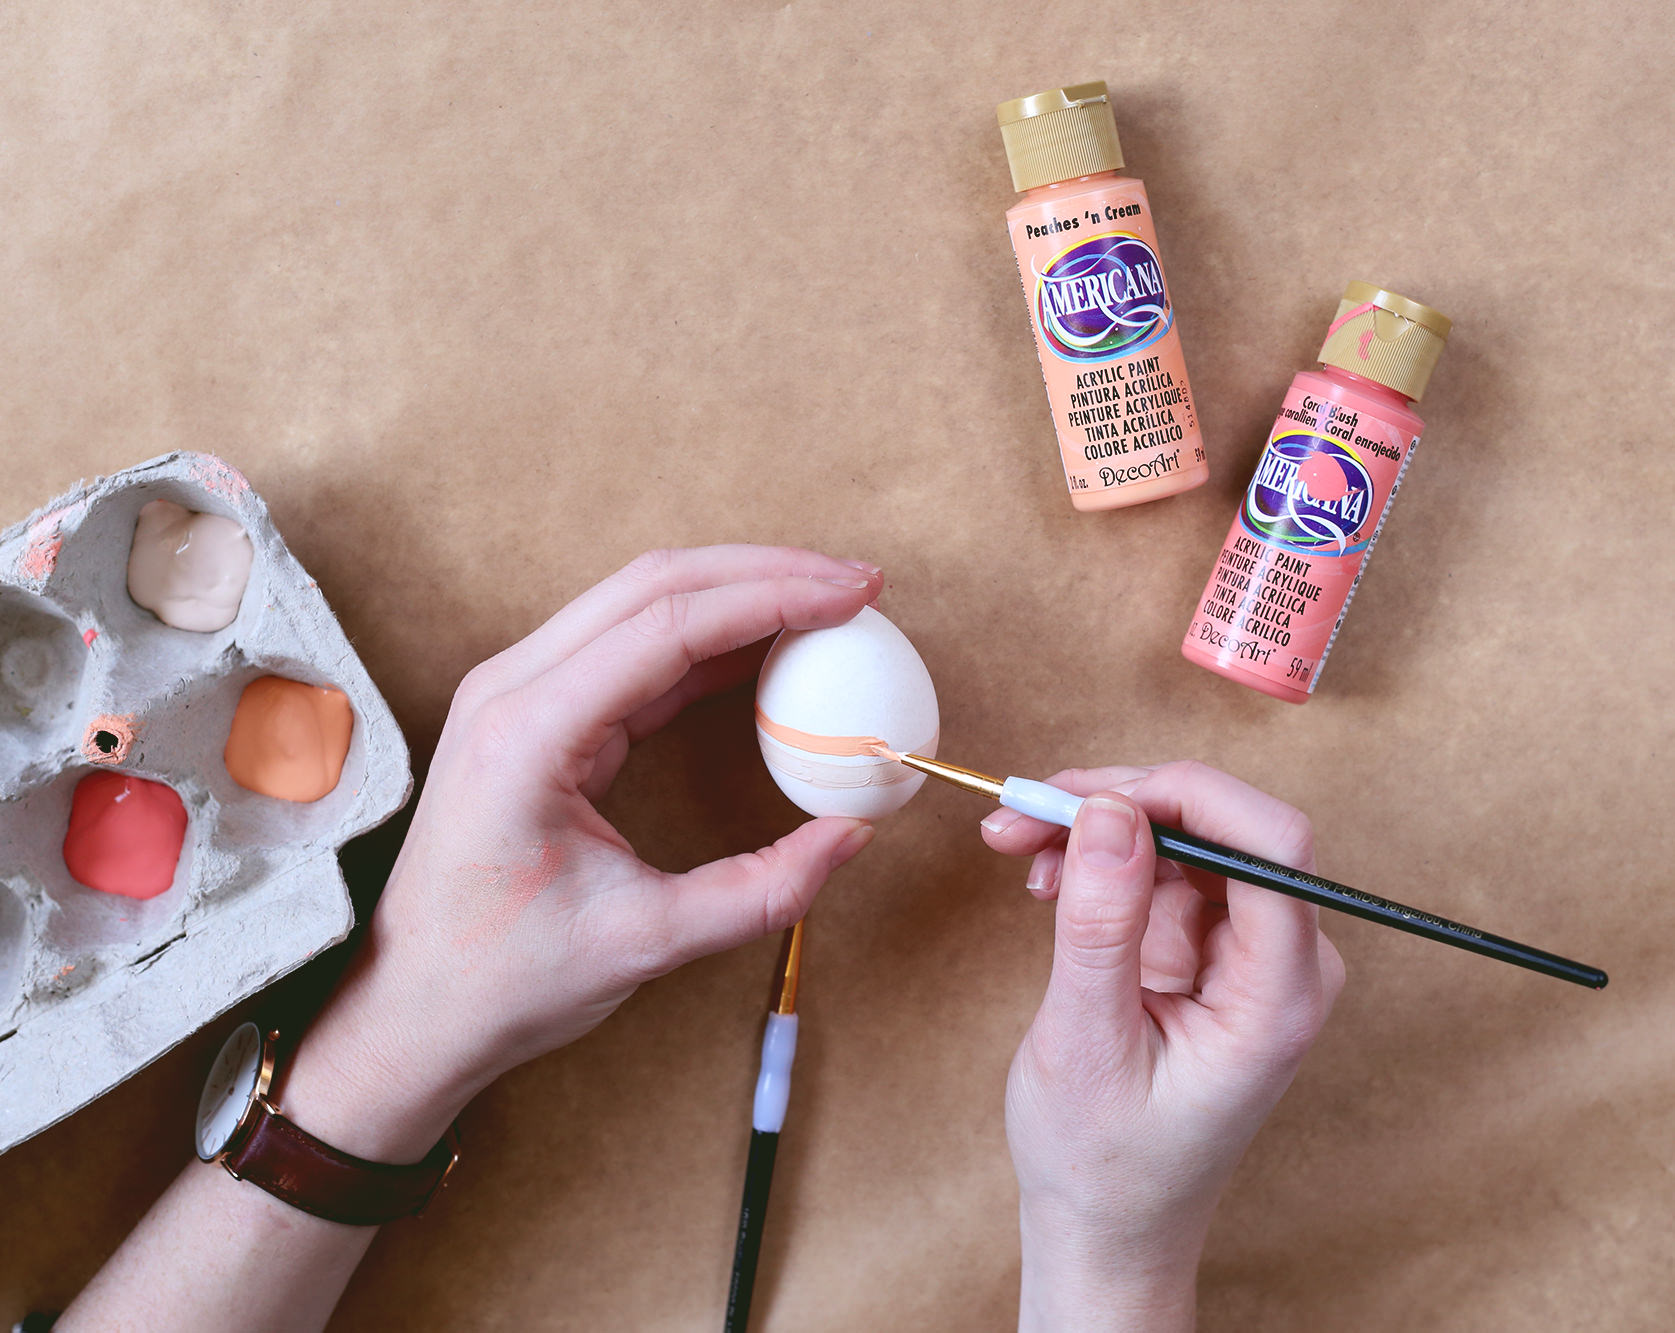 Try adding a few simple brushstrokes to your Easter eggs for an easy Easter DIY!